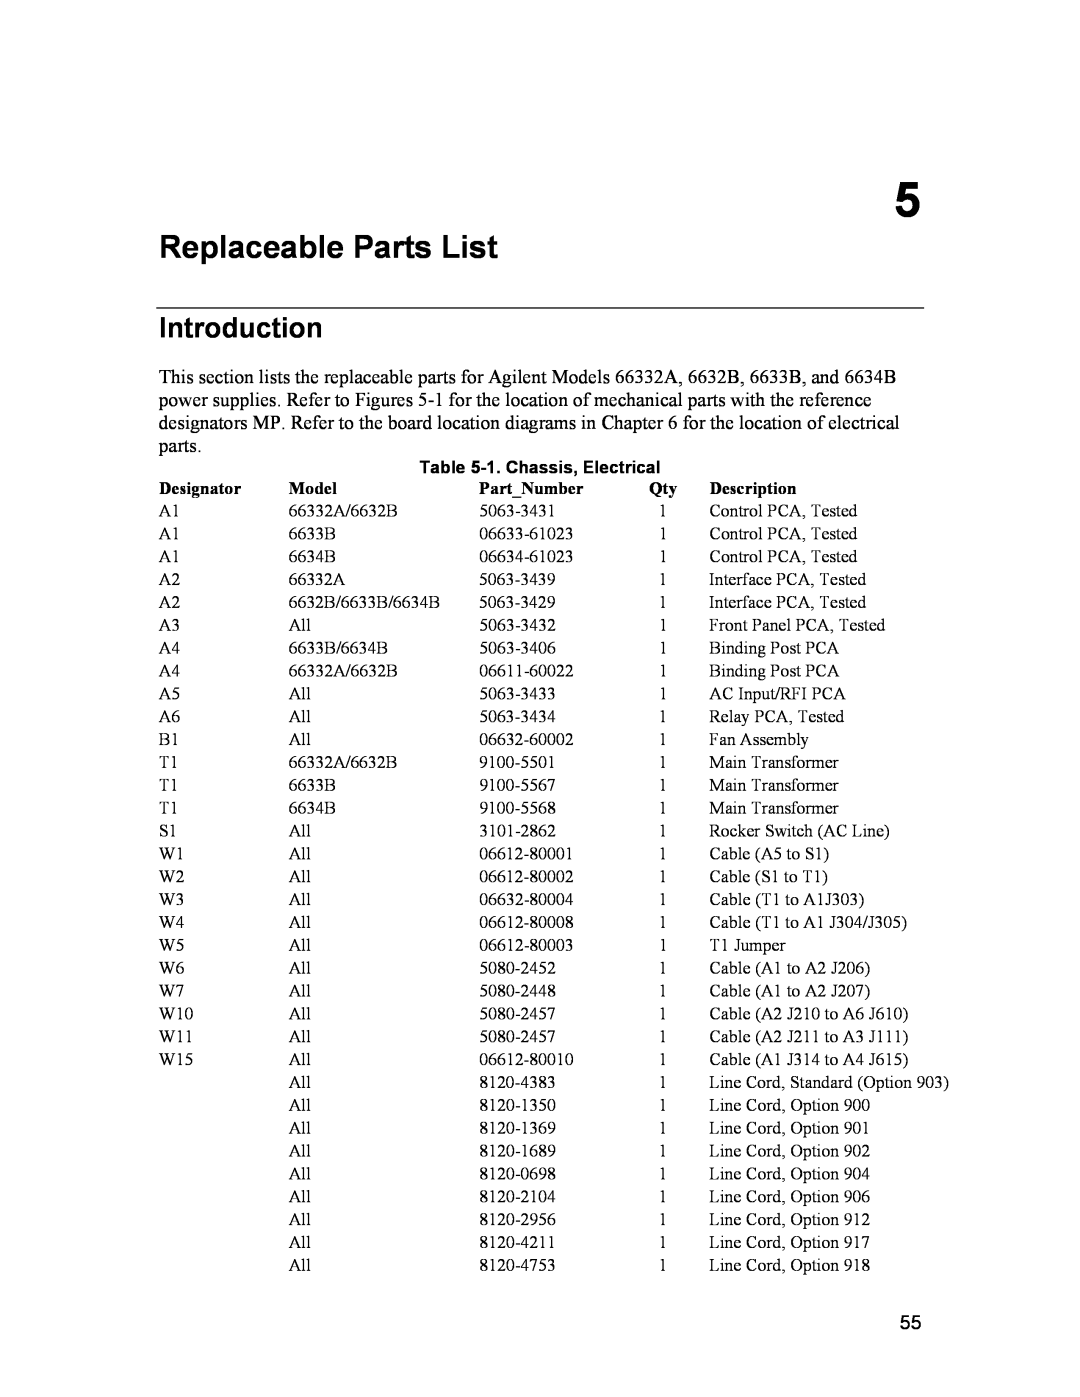 Agilent Technologies 6632B, 6634B, 66332A, 6633B service manual Replaceable Parts List, 1.Chassis, Electrical, Introduction 